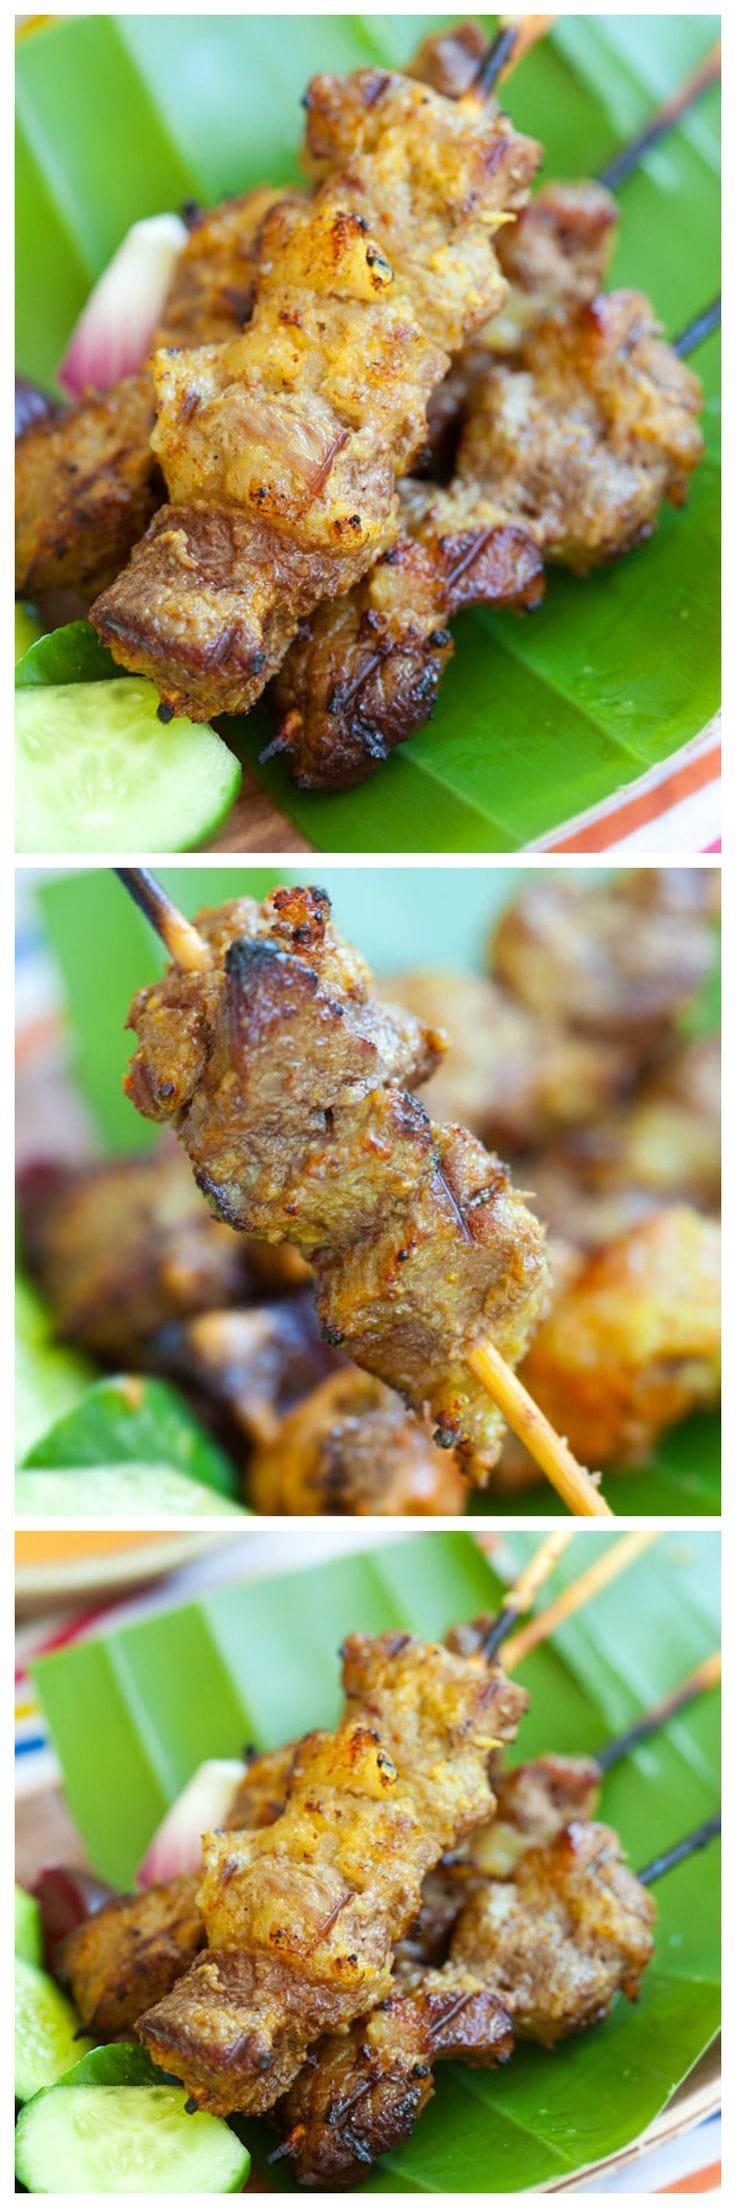 Beef Satay - beef is marinated overnight with spices, skewed to satay and grilled. Best beef satay recipe with spicy peanut sauce | rasamalaysia.com